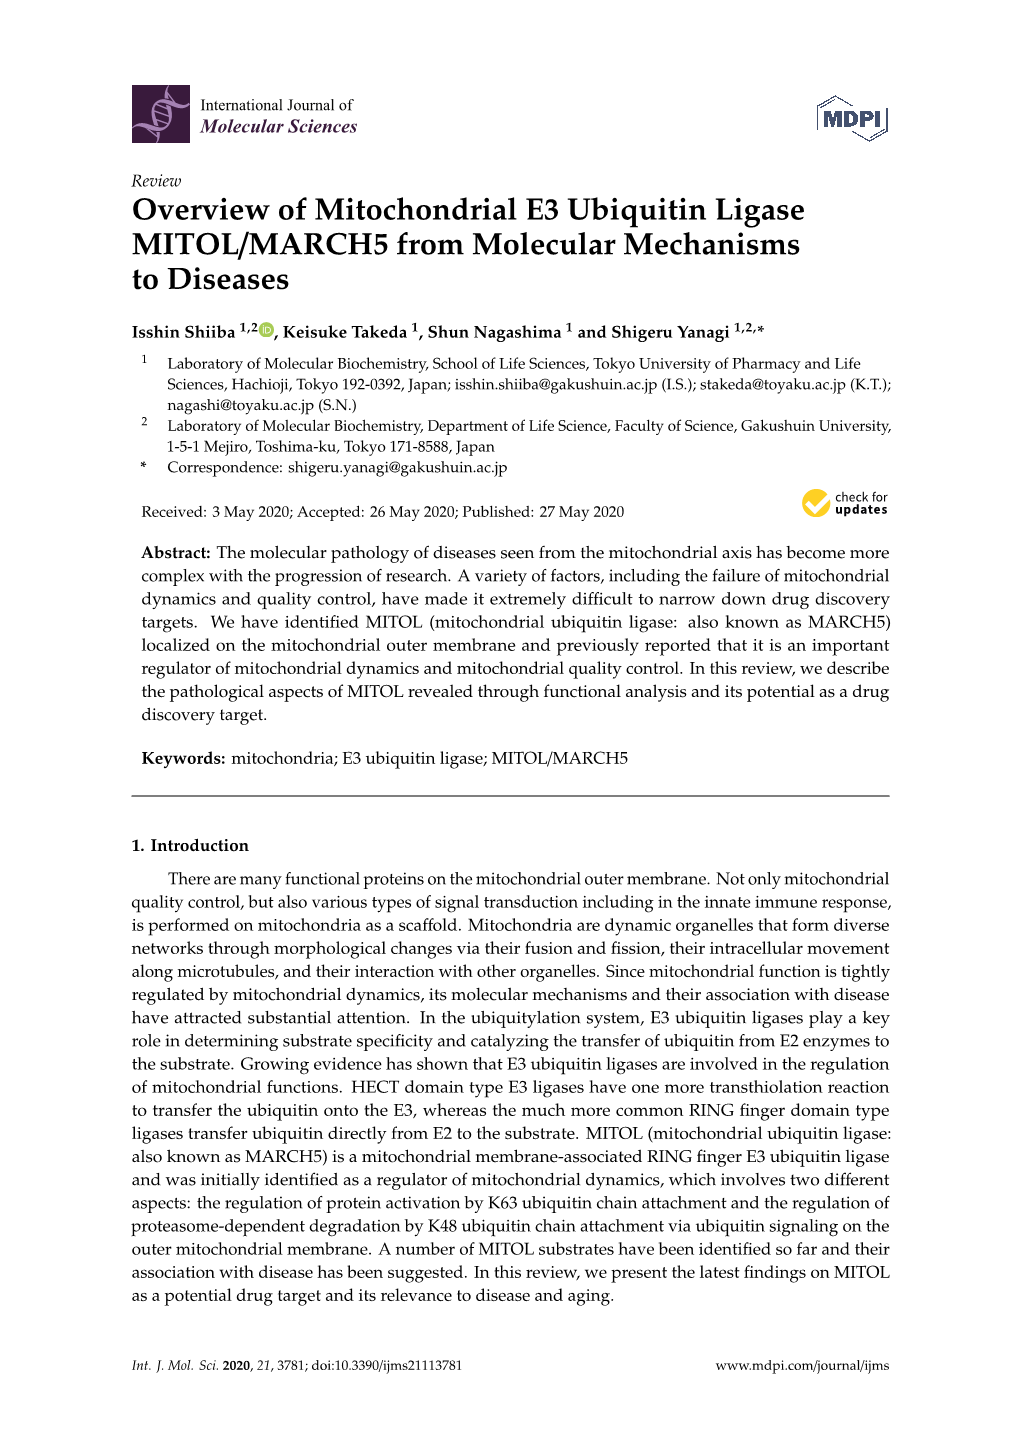 Overview of Mitochondrial E3 Ubiquitin Ligase MITOL/MARCH5 from Molecular Mechanisms to Diseases